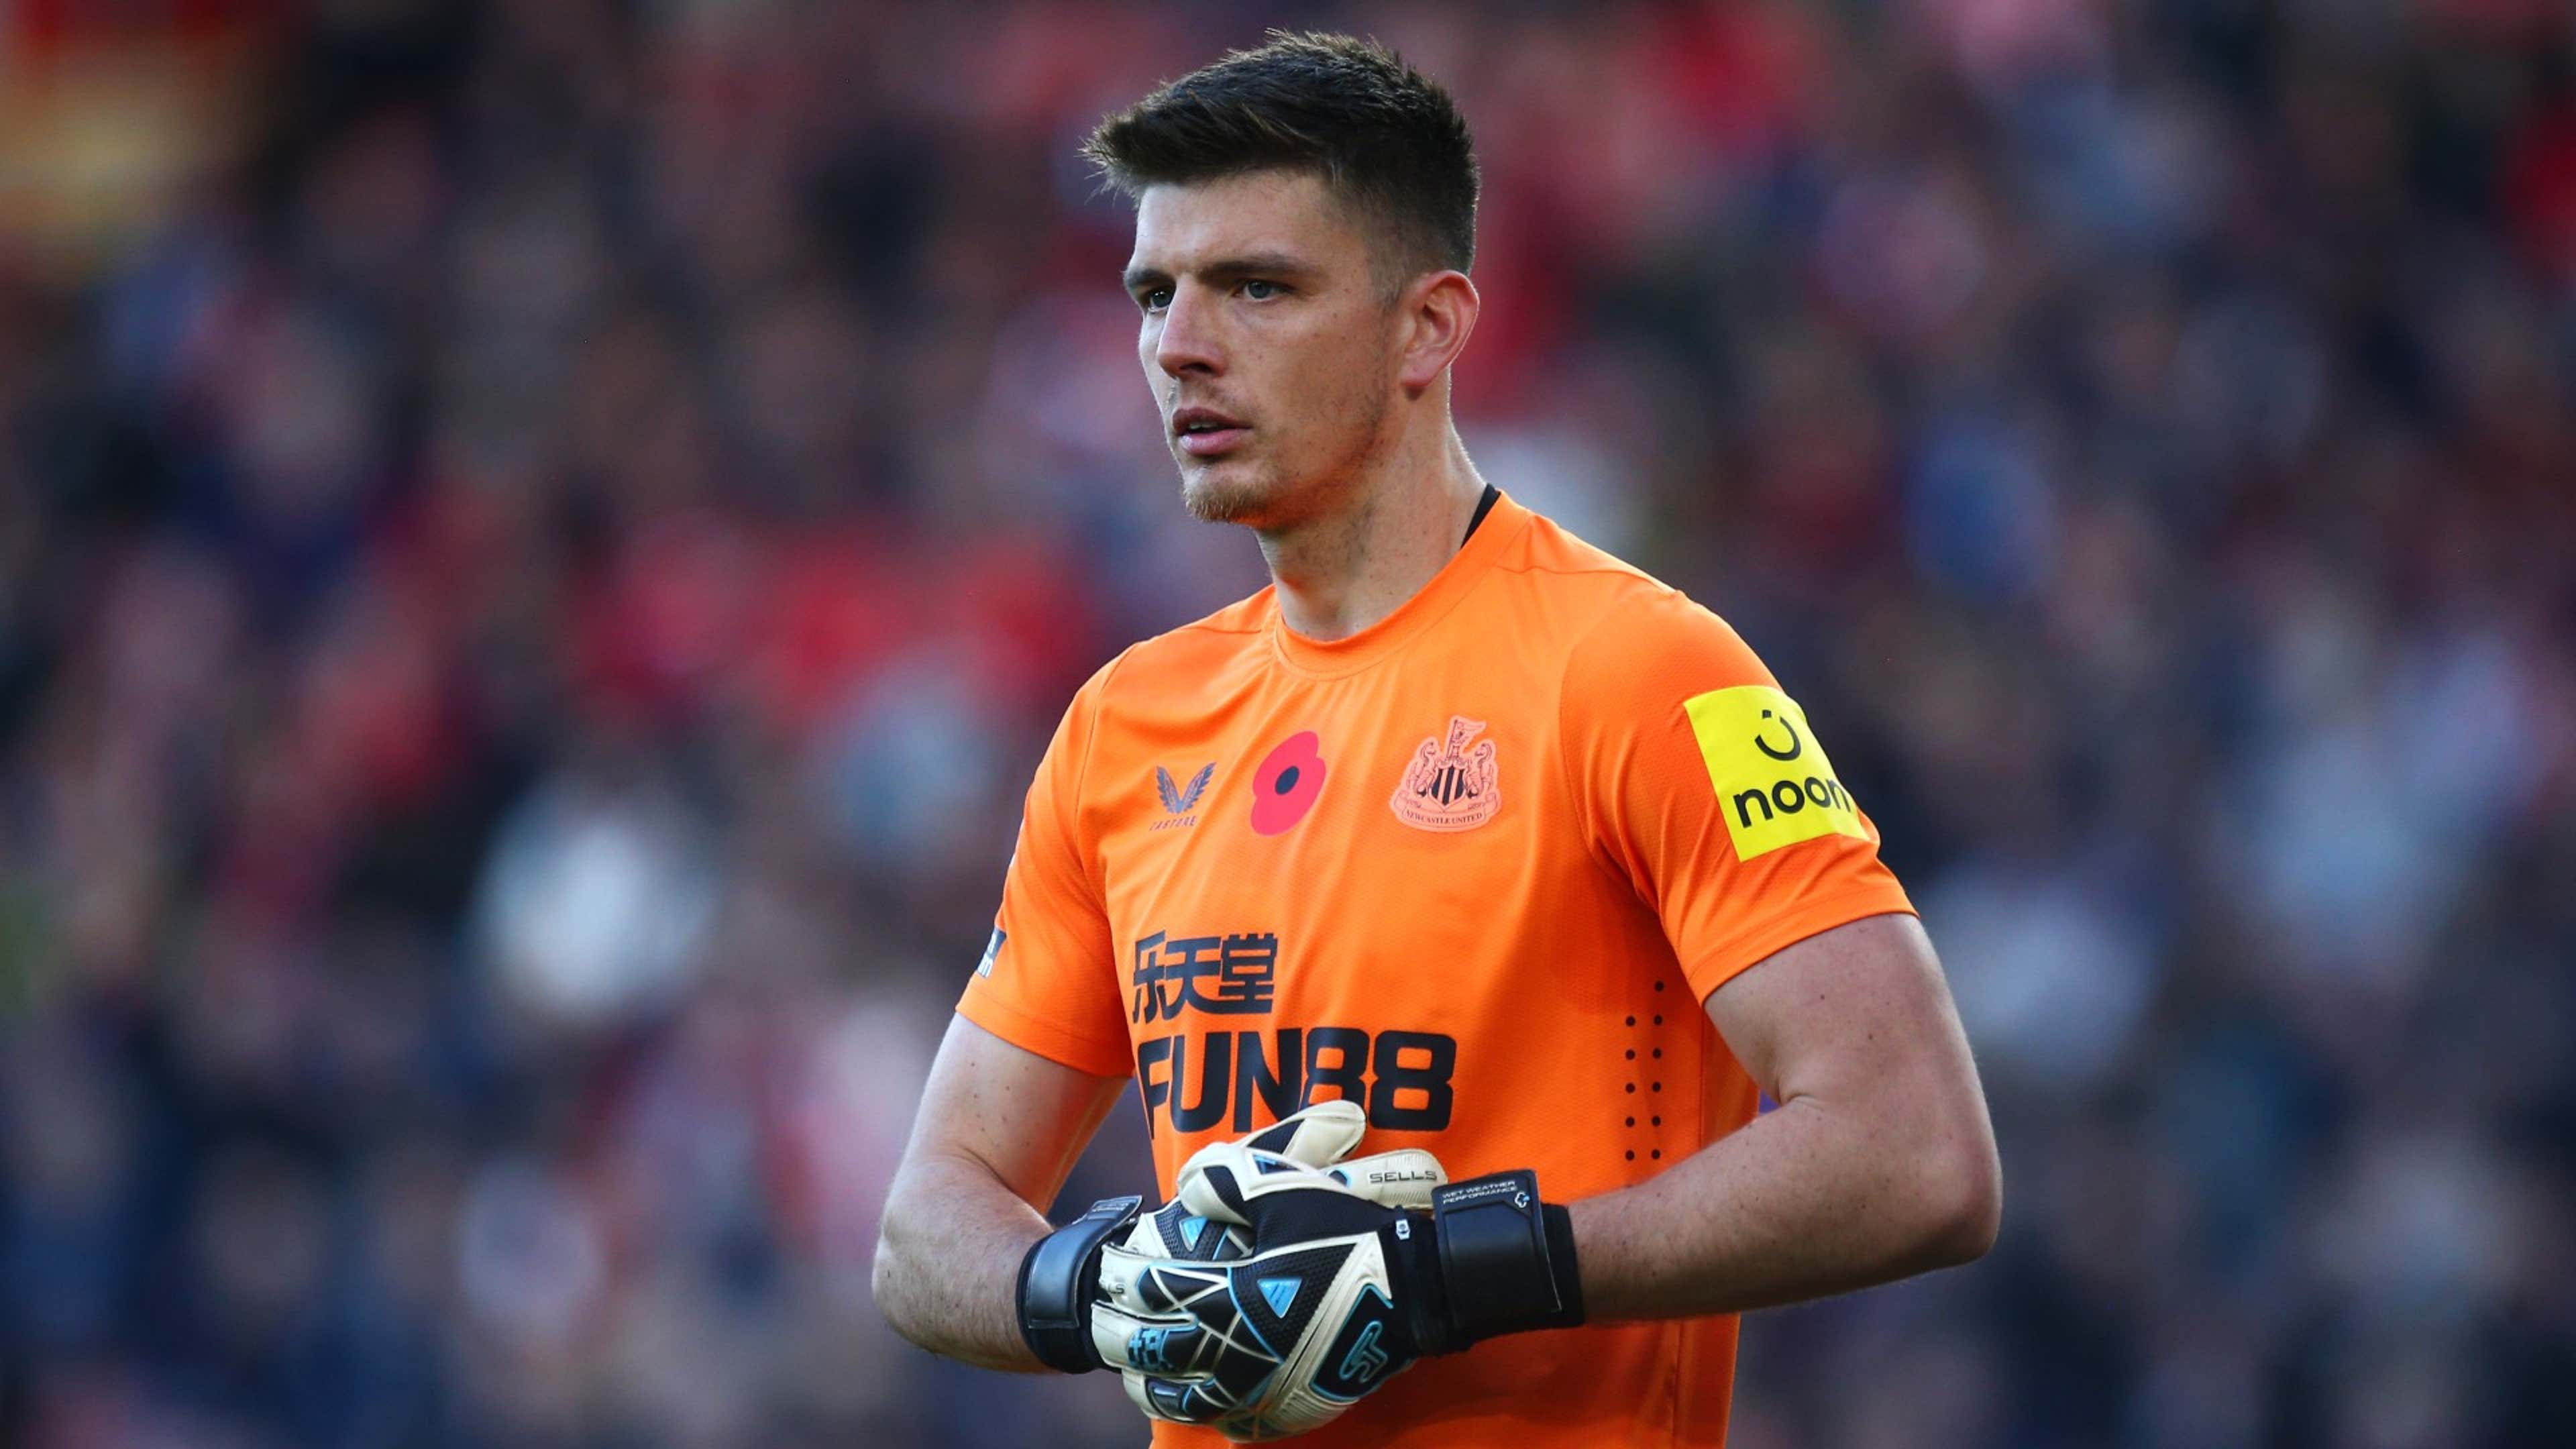 Nick Pope: Newcastle sign England goalkeeper from Burnley in £10m deal, Football News